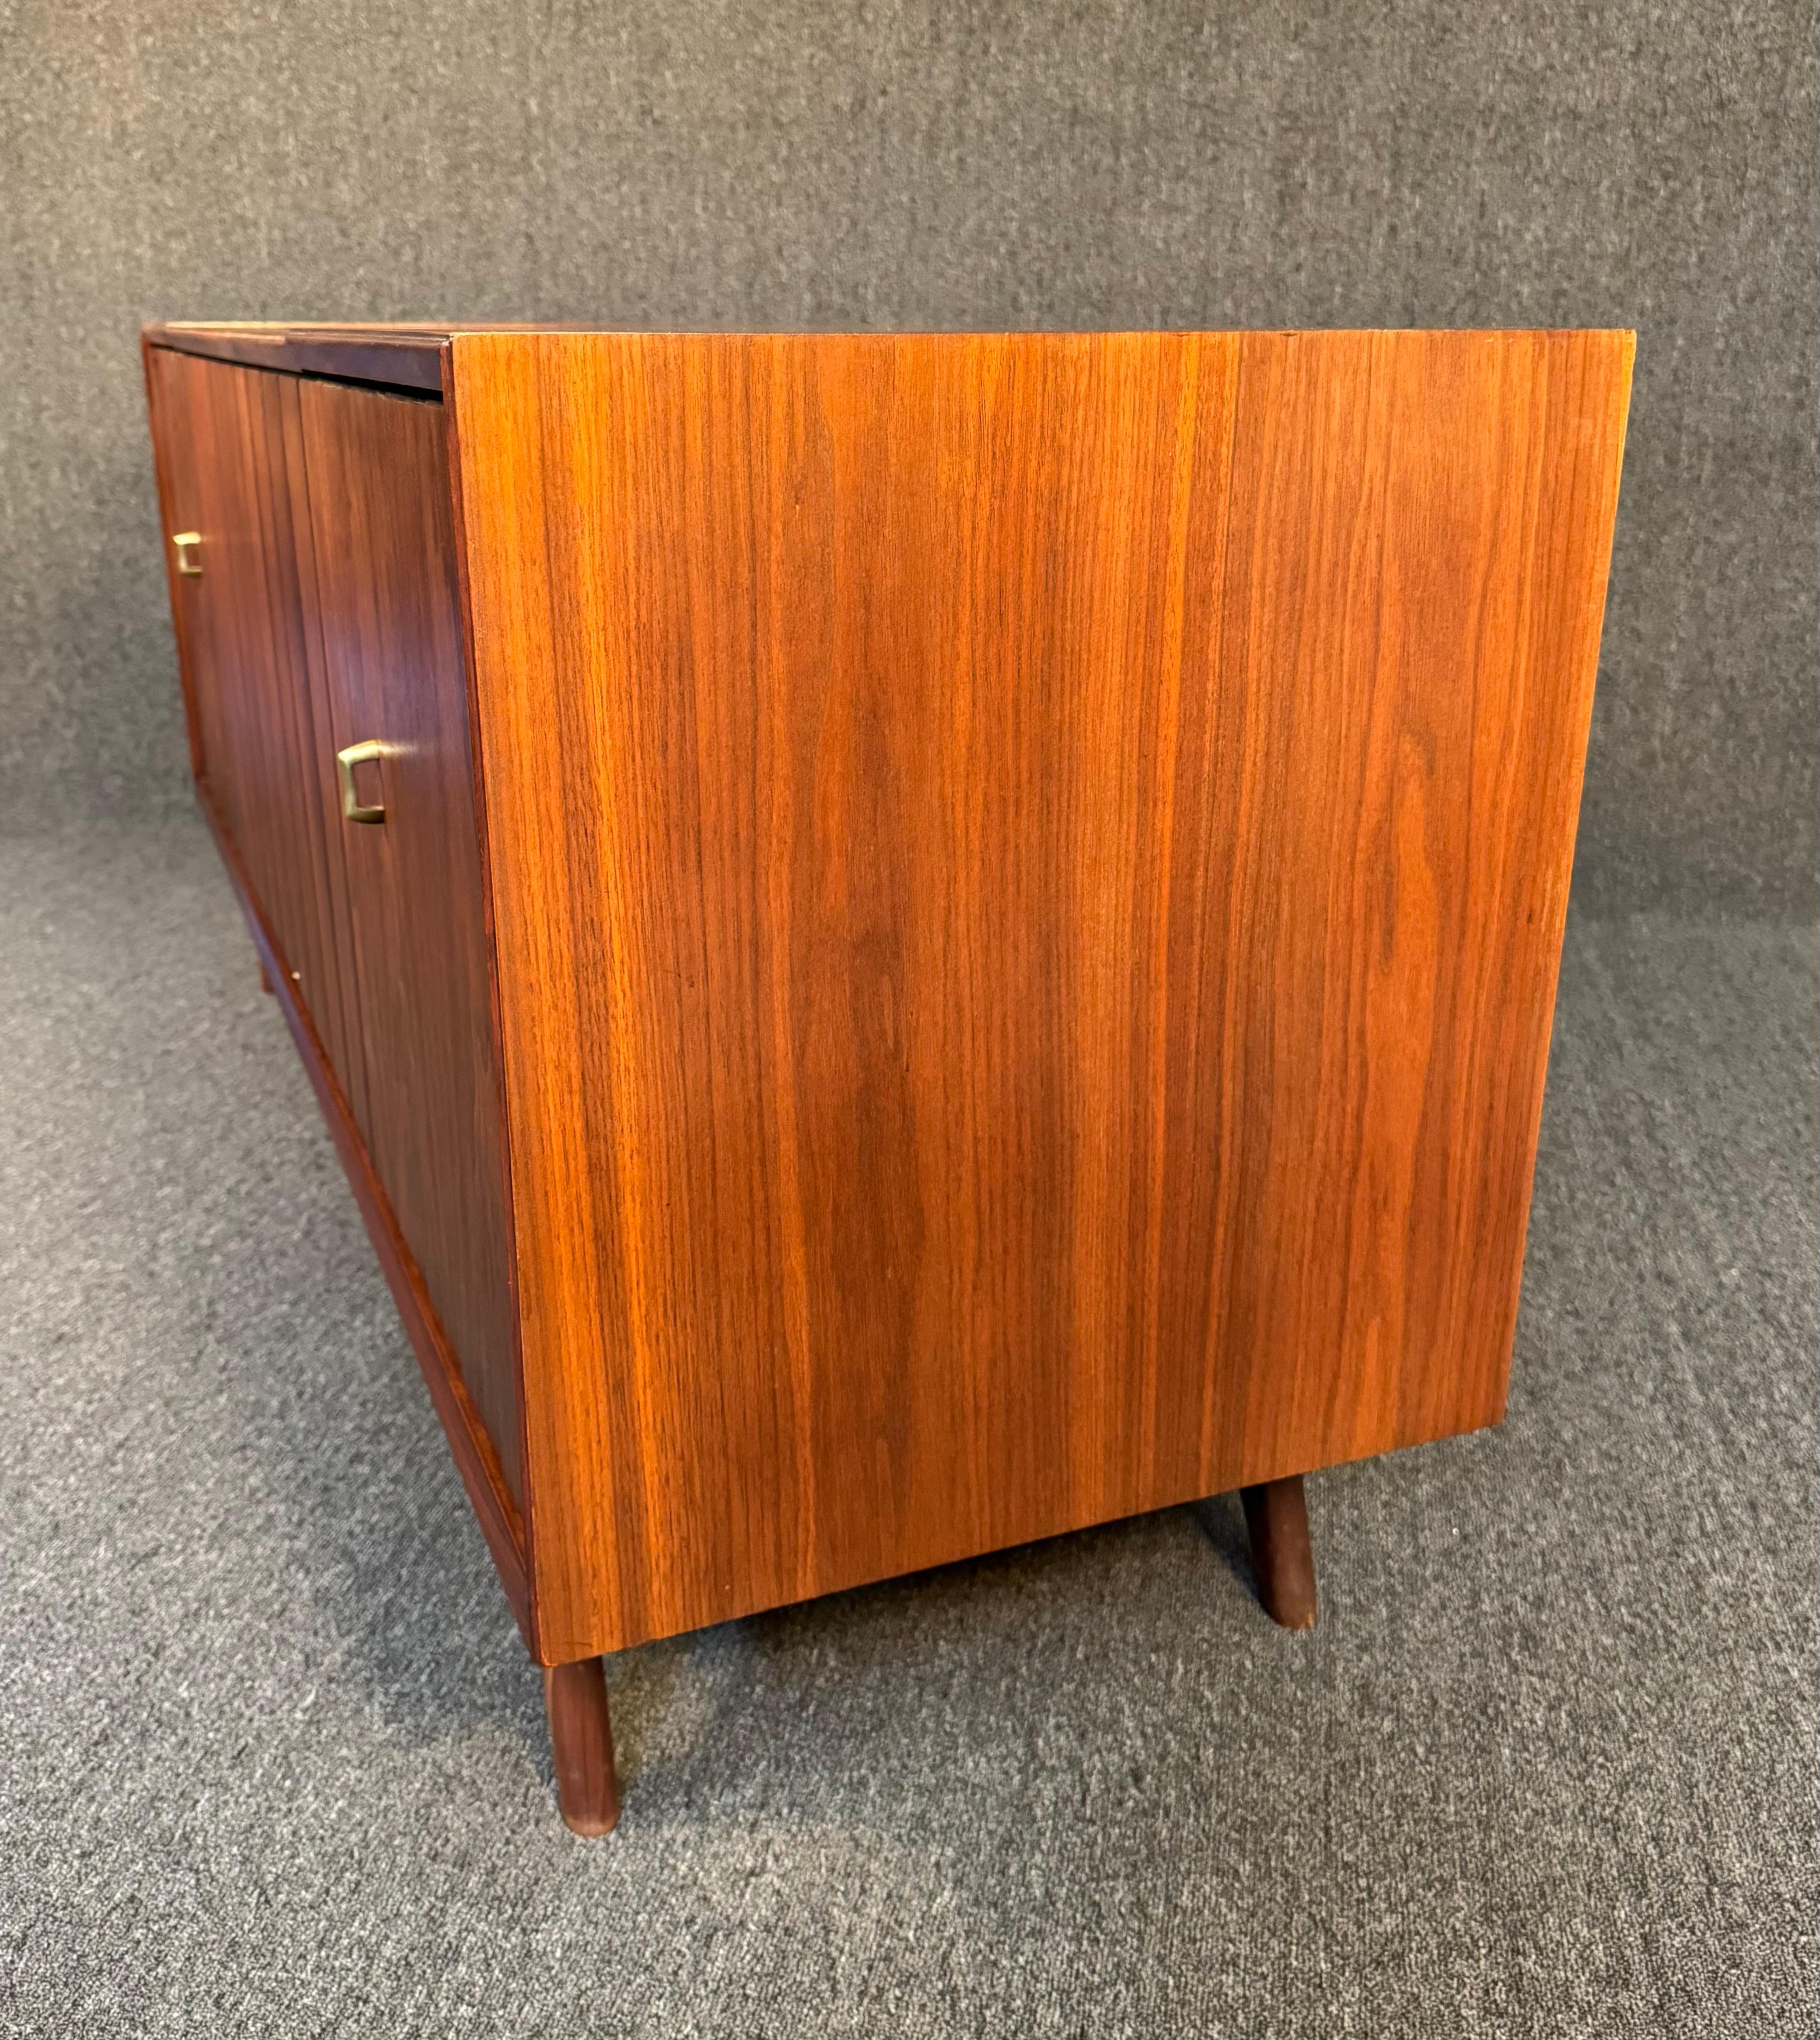 Mid-20th Century Vintage Mid Century Modern Walnut Zenith Stereo Console For Sale